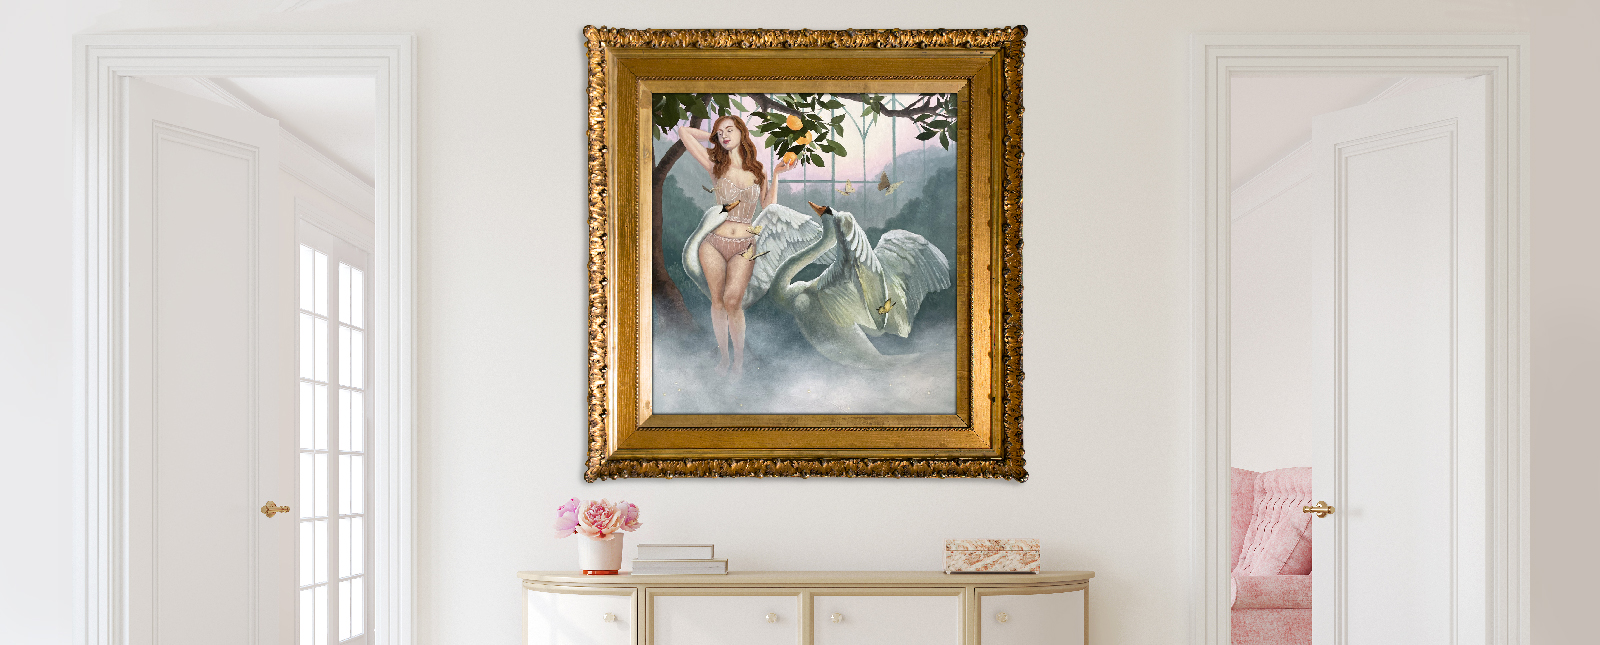 An ornate gold-framed painting of a fairy riding a swan, exuding a whimsical charm, hangs above a white dresser in a bright room with pastel accents.